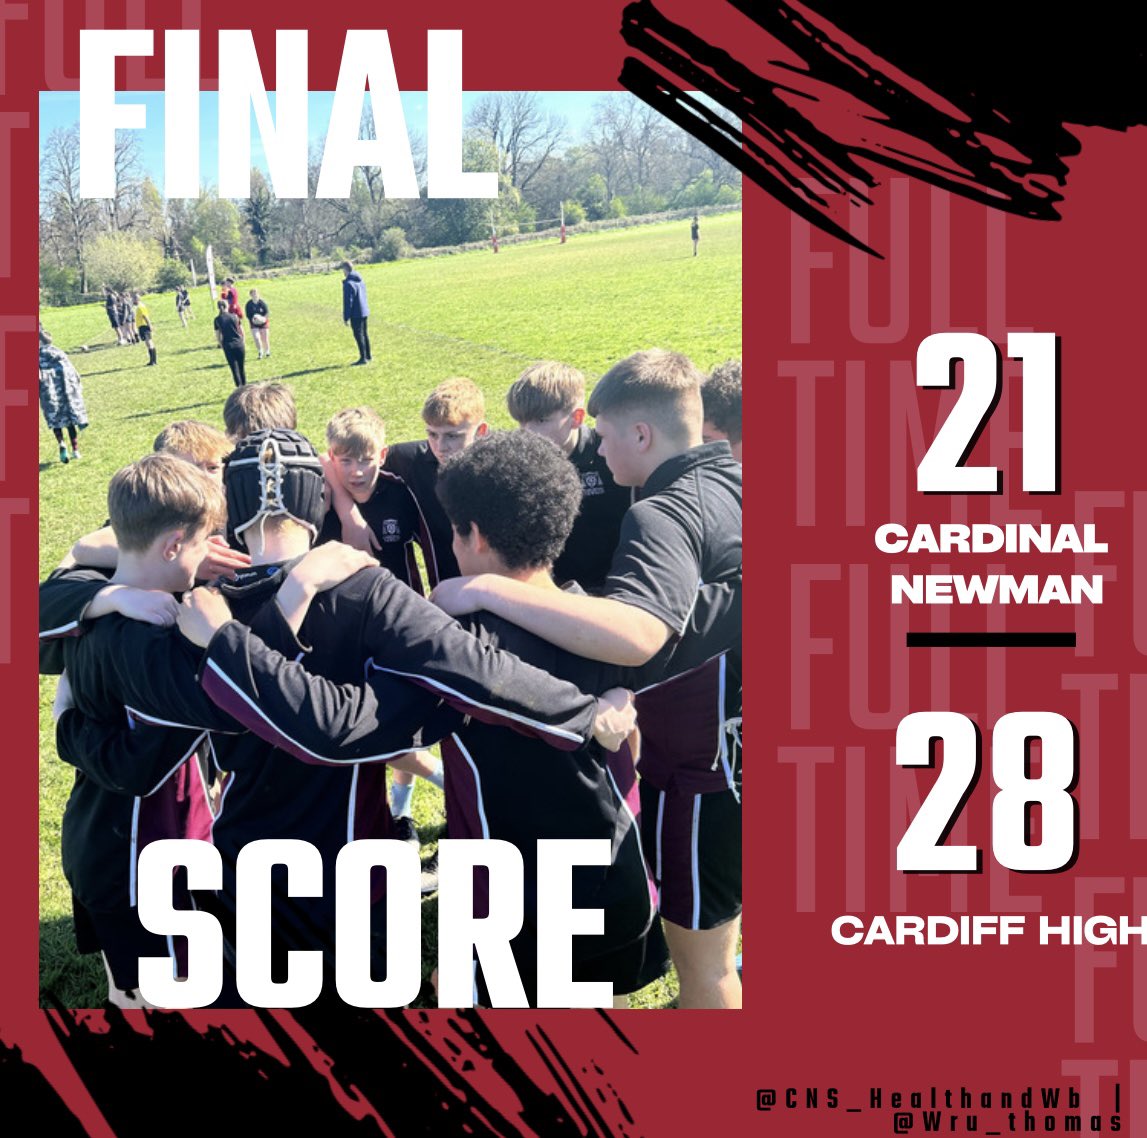 Tough loss to take against Cardiff High and that’s our day done. Boys represented themselves and the school well. Onto the final day tomorrow with year 7. @WRU_Thomas @CNSRCT @CnsYear7